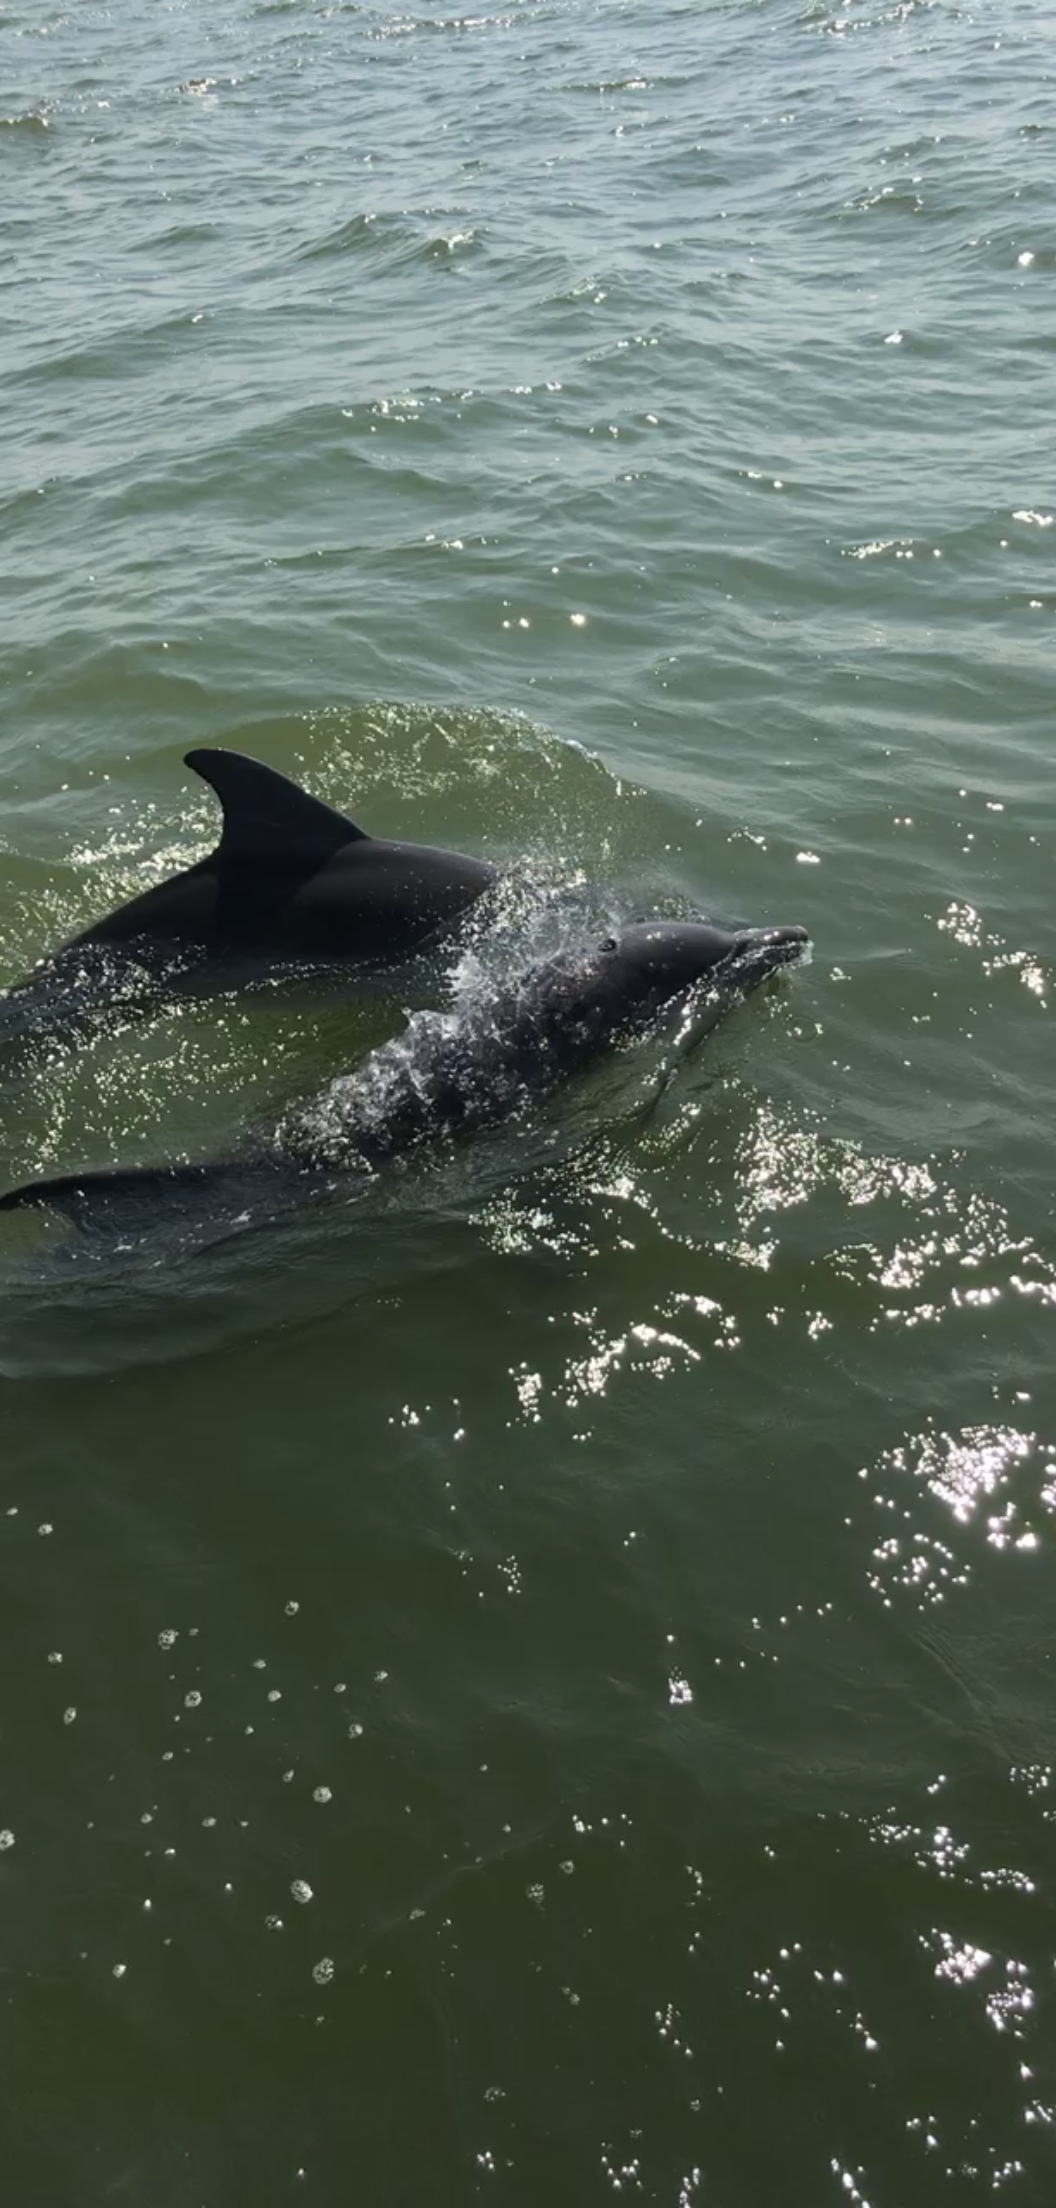 Dolphins in the bay